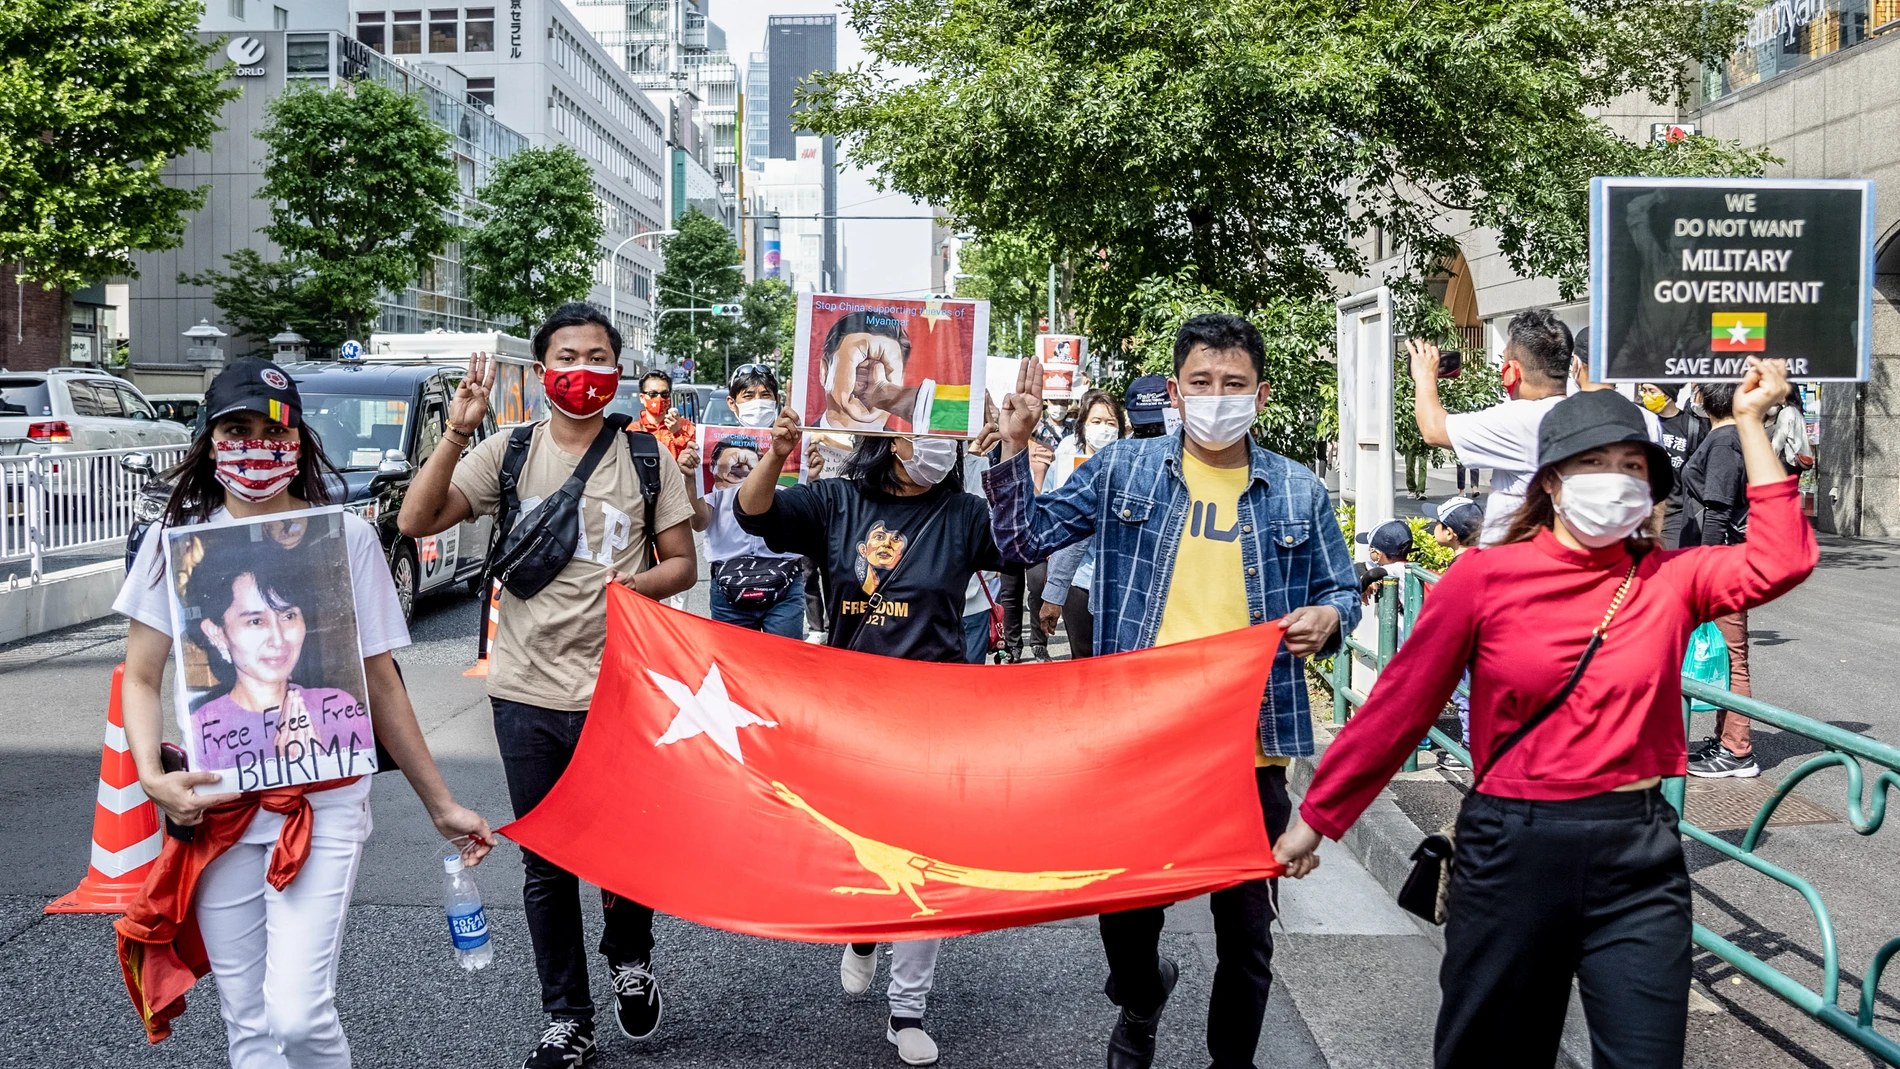 09 May 2021, Japan, Tokyo: Protesters hold a Myanmar flag and placards during a demonstration demanding Respect of Democracy, Freedom and Human rights in Asia. Photo: Viola Kam/SOPA Images via ZUMA Wire/dpaViola Kam/SOPA Images via ZUMA W / DPA09/05/2021 ONLY FOR USE IN SPAIN